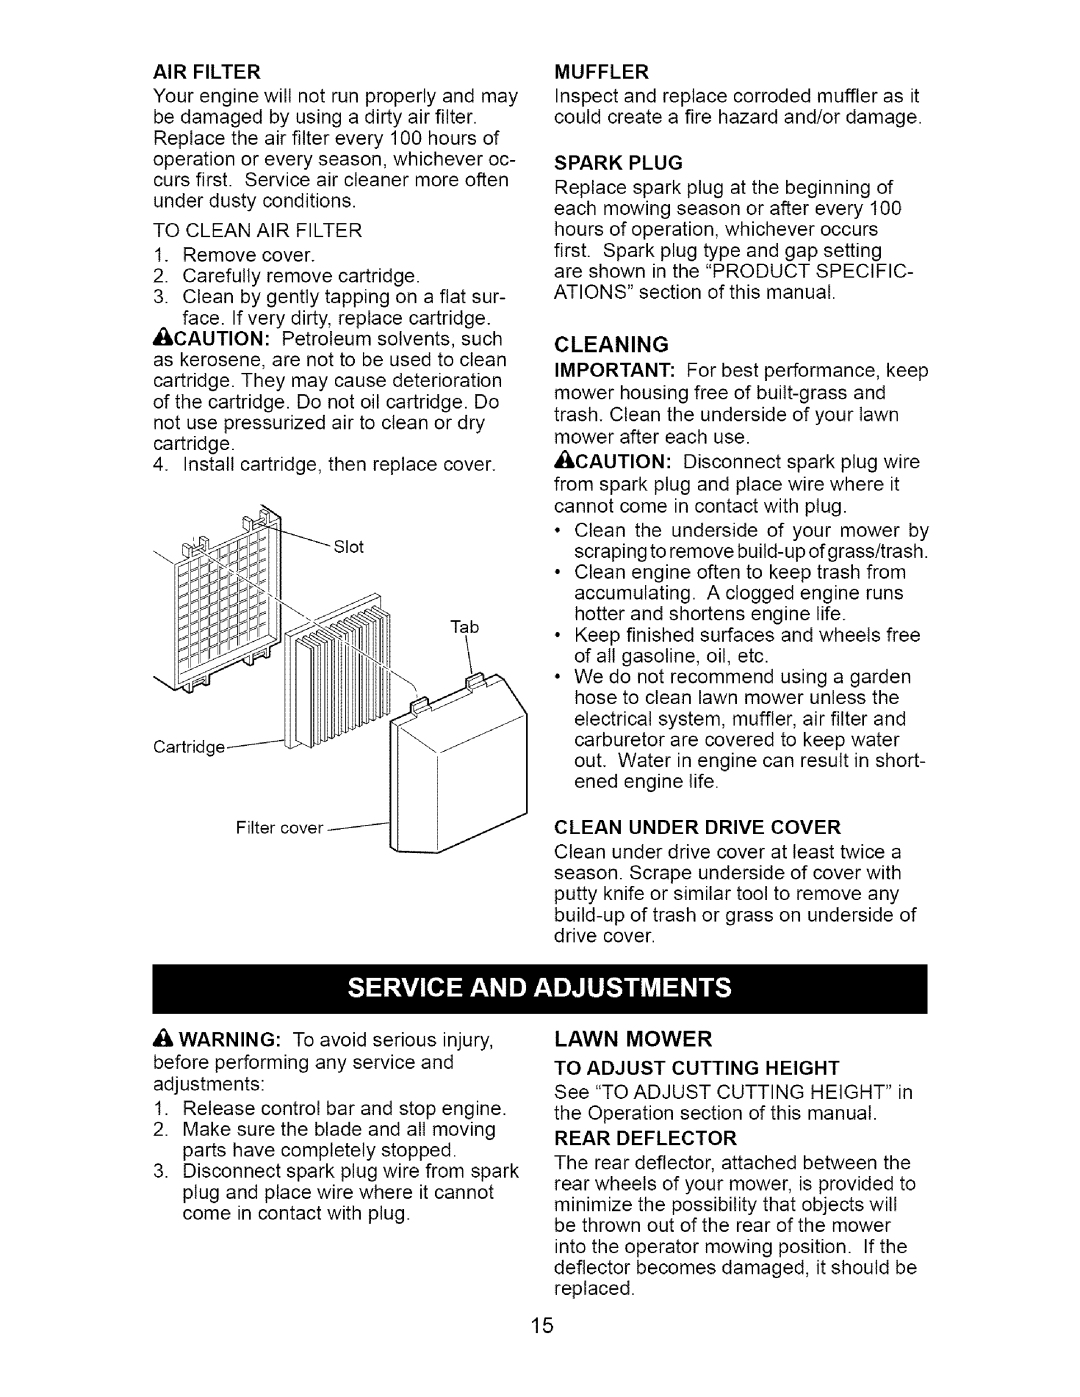 Craftsman 917.37172 owner manual Air Filter, Muffler, Spark Plug, Cleaning, Lawn Mower To Adjust Cutting Height 